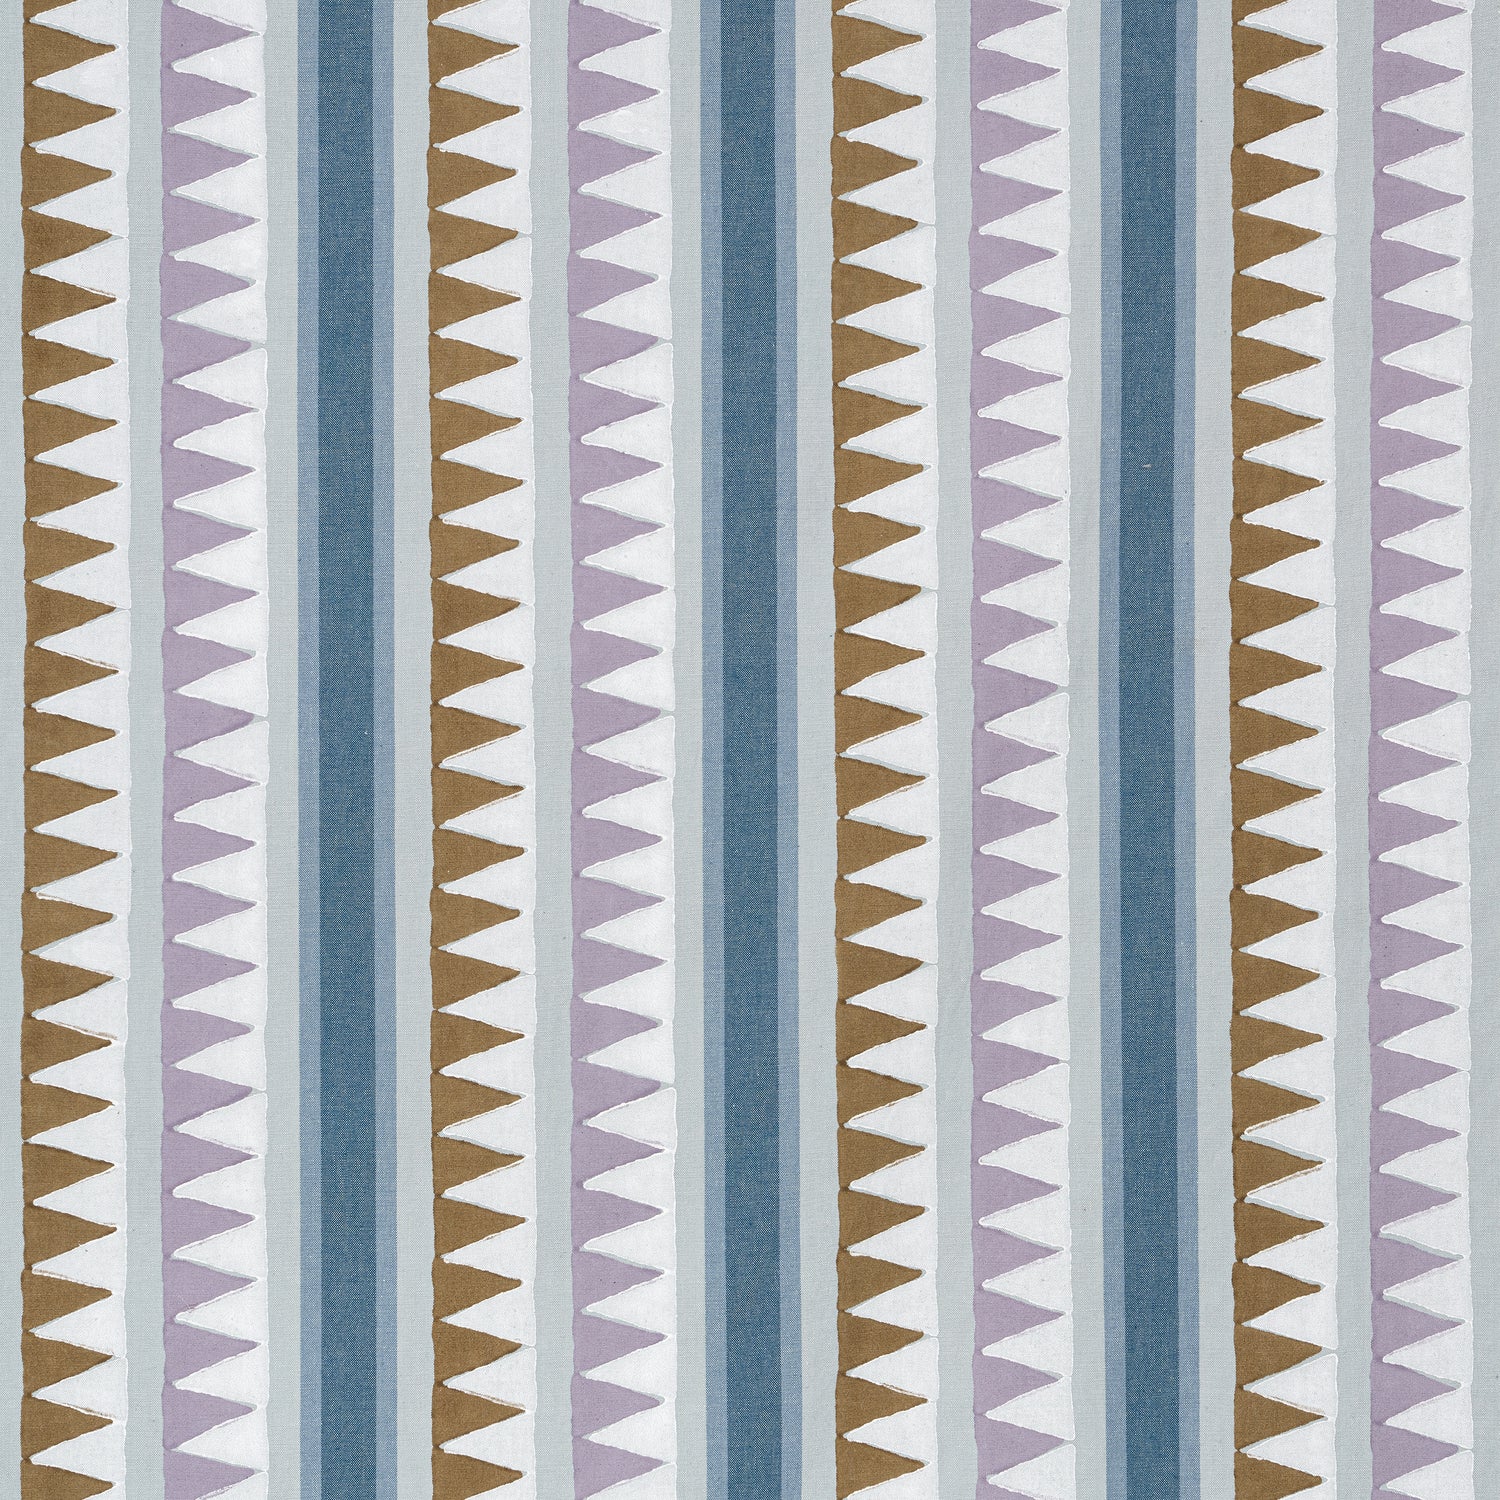 Lomita Stripe fabric in lavender and blue color - pattern number F916238 - by Thibaut in the Kismet collection